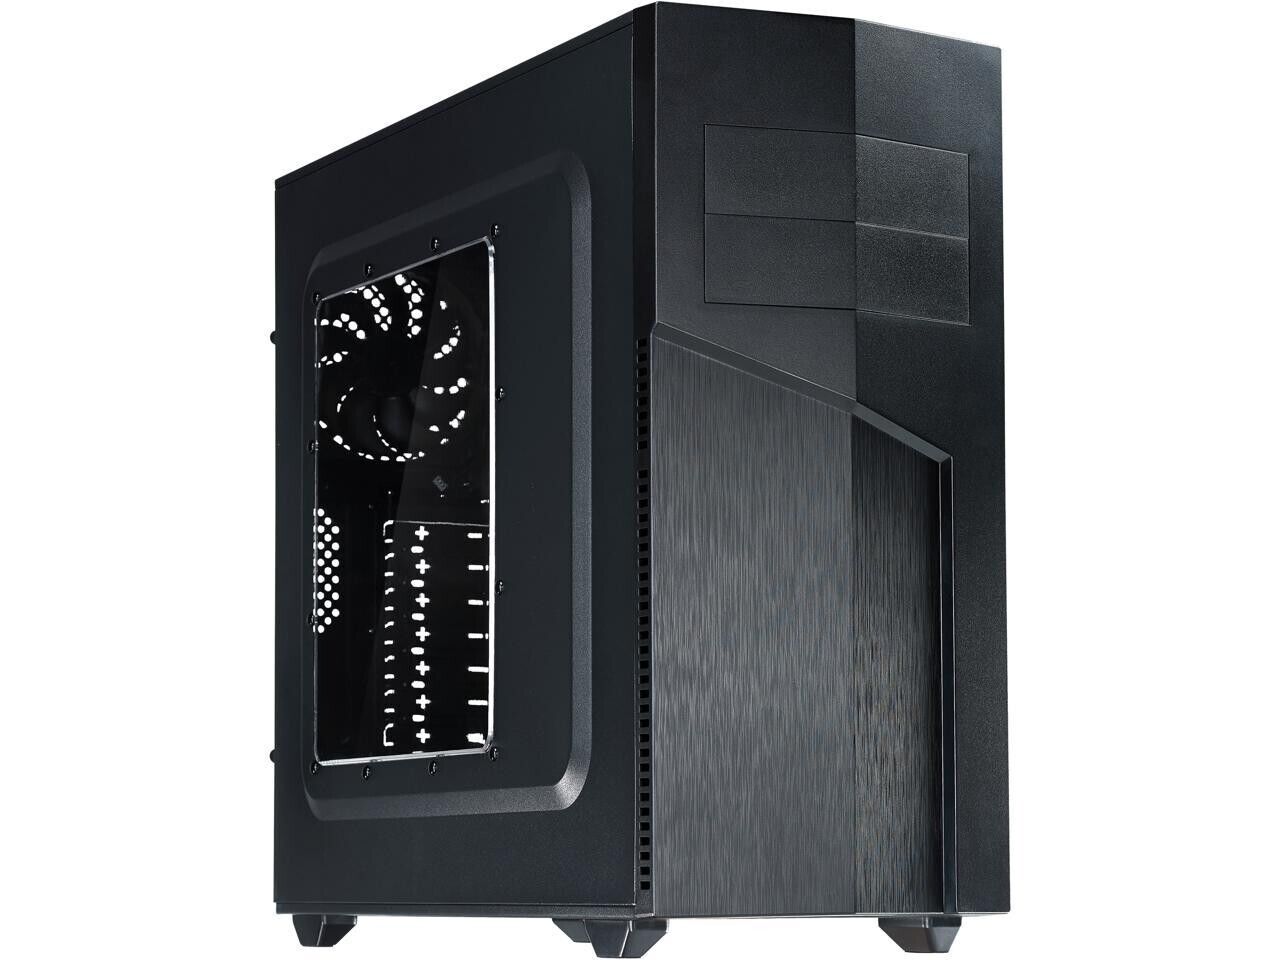 ROSEWILL TYRFING ATX Mid Tower Gaming Computer PC Desktop Case 2x Fans Included